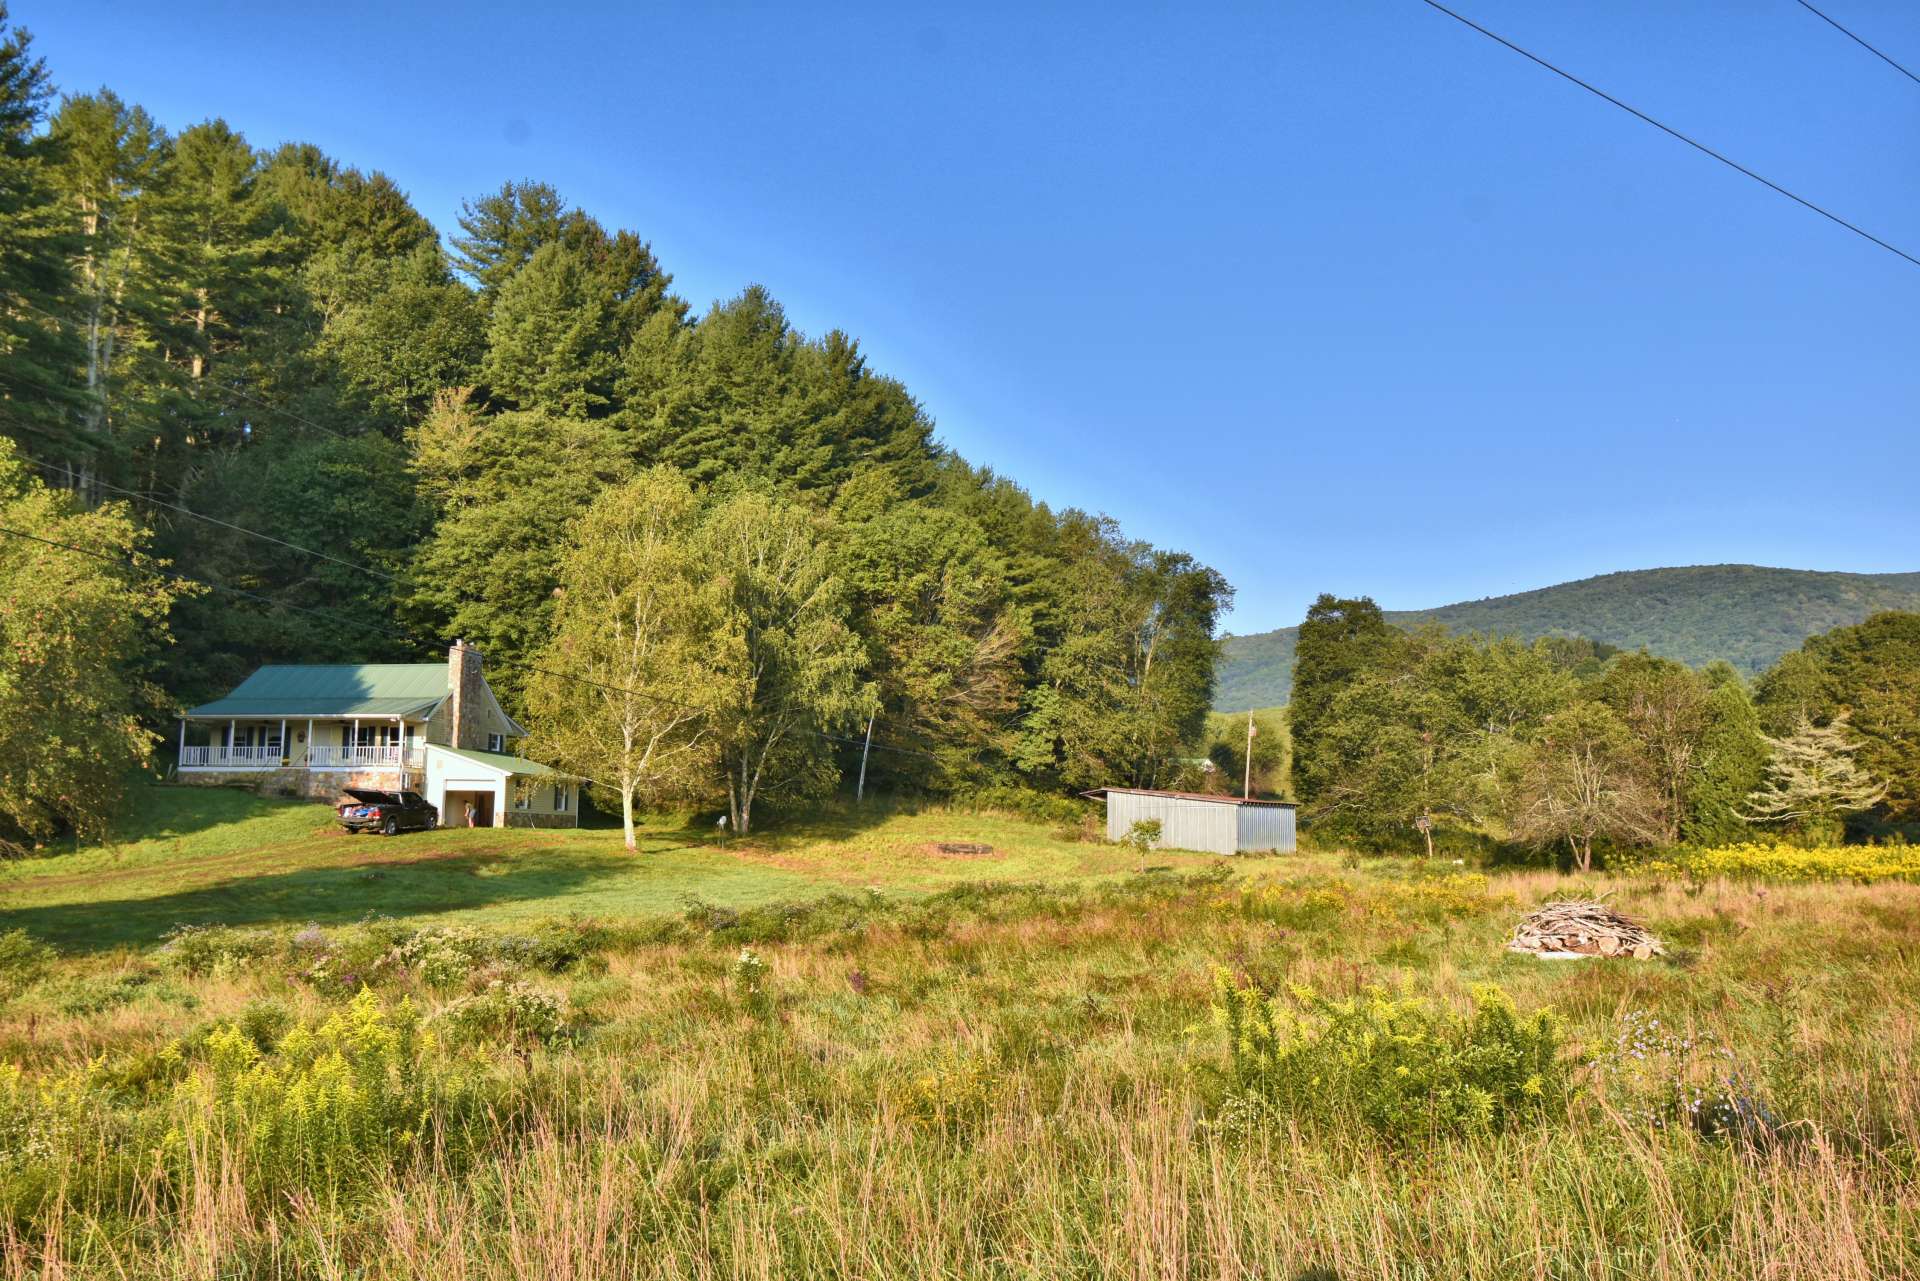 Perfect Grayson Highlands mini farm in the heart of horse country.